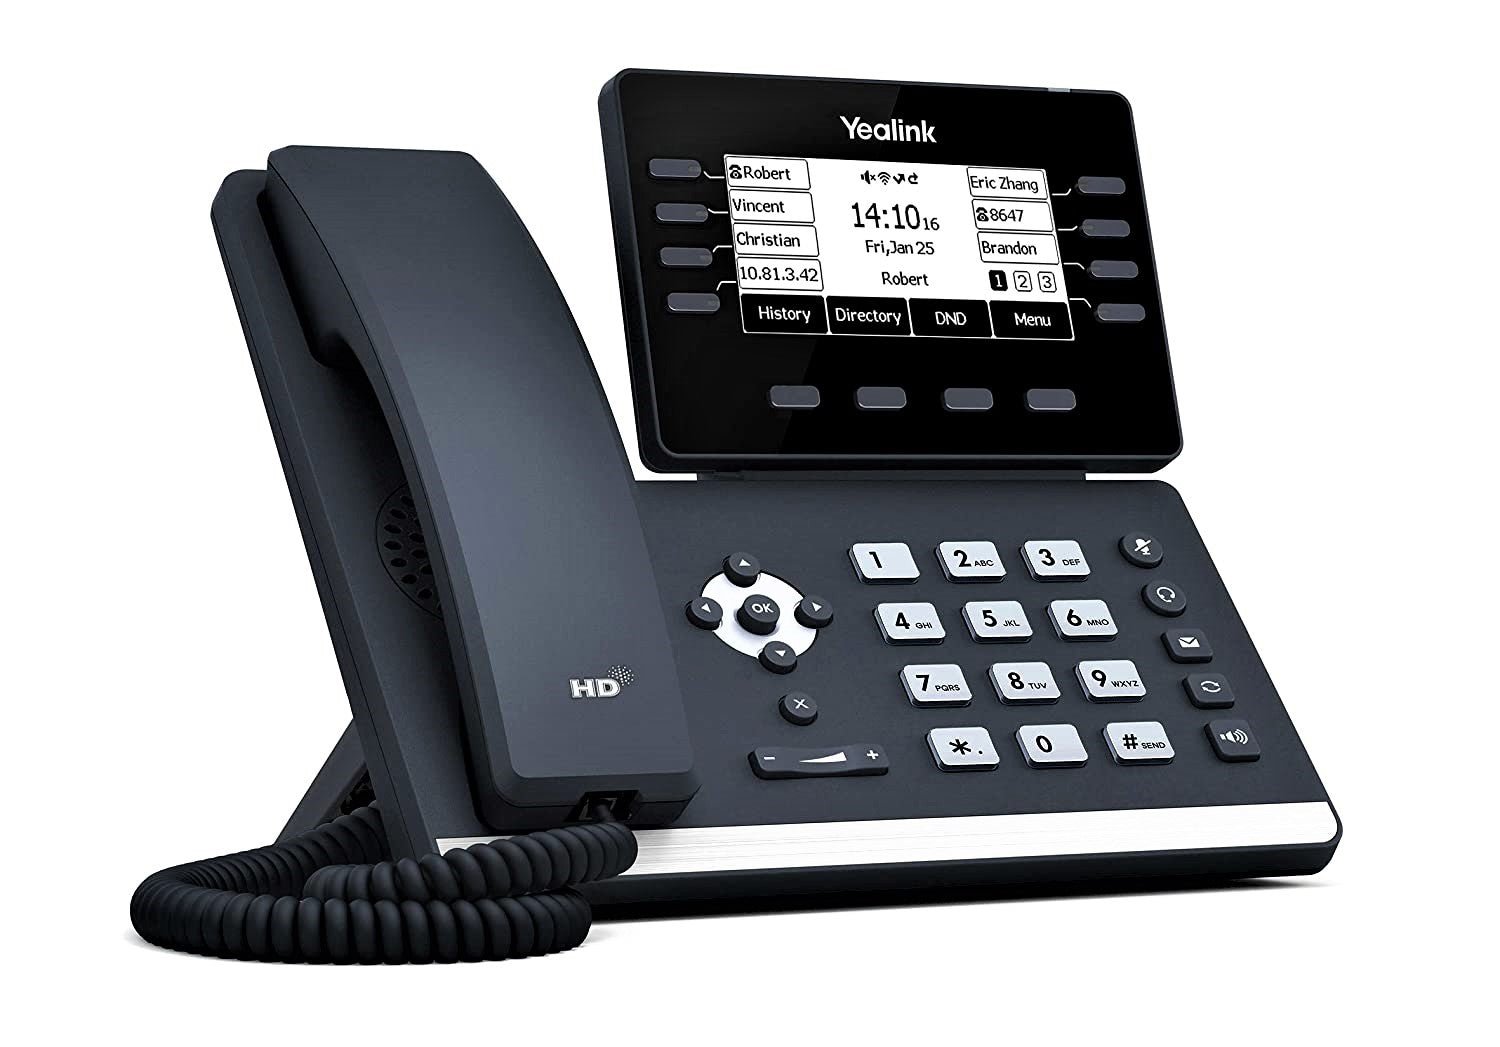 Yealink T53W IP Phone, 12 VoIP Accounts. 3.7-Inch Graphical Display. USB 2.0, 802.11ac Wi-Fi, Dual-Port Gigabit Ethernet, 802.3af PoE, Power Adapter Not Included (SIP-T53W)